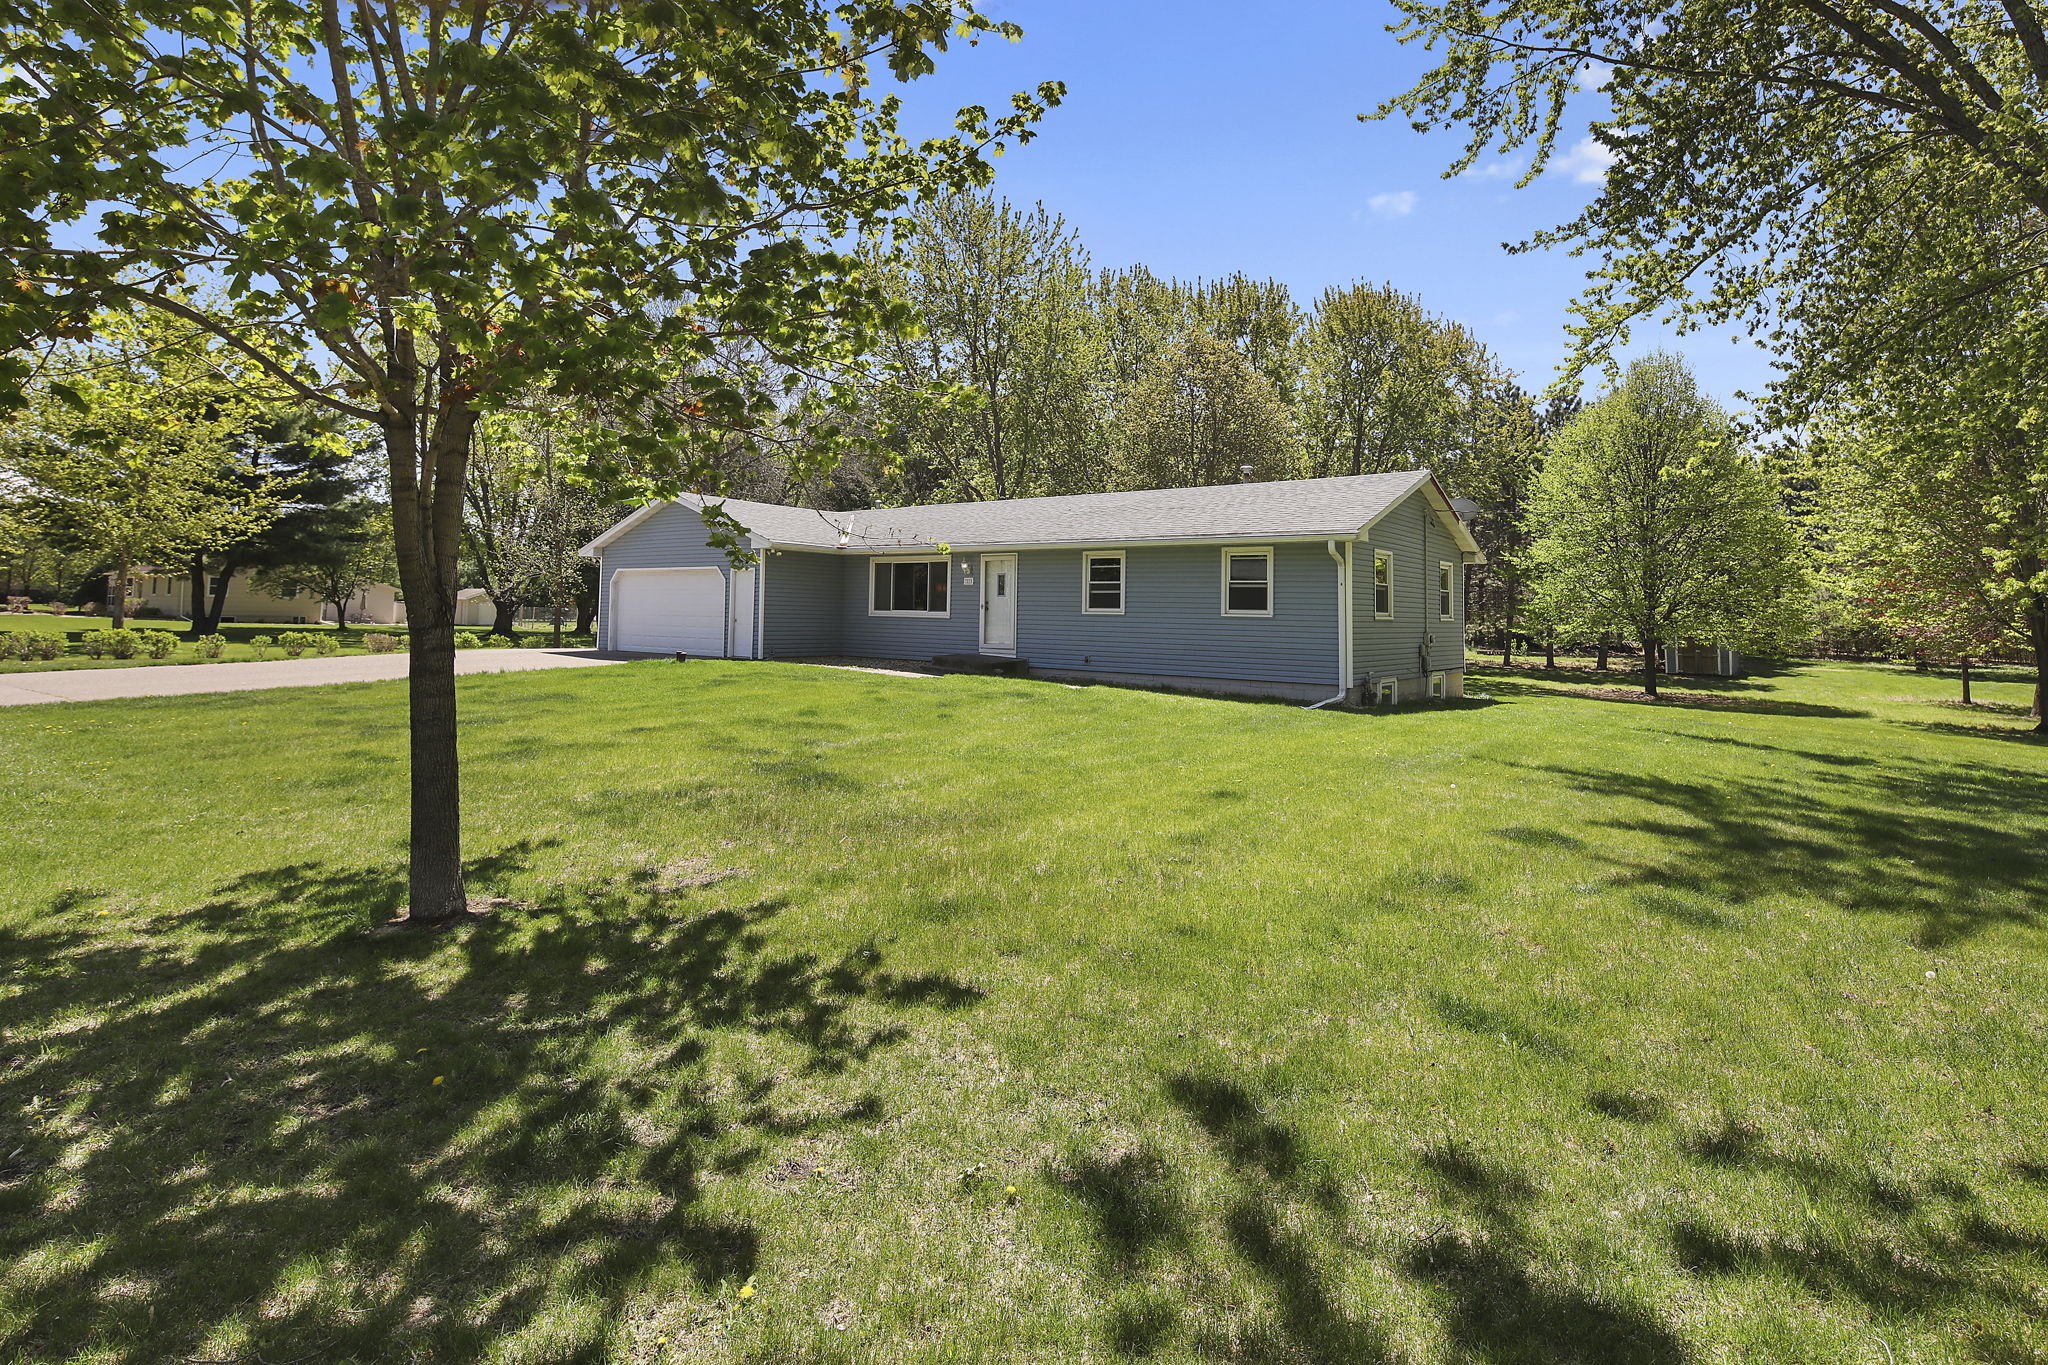  7030 152nd Ave NW, Ramsey, MN 55303, US Photo 48